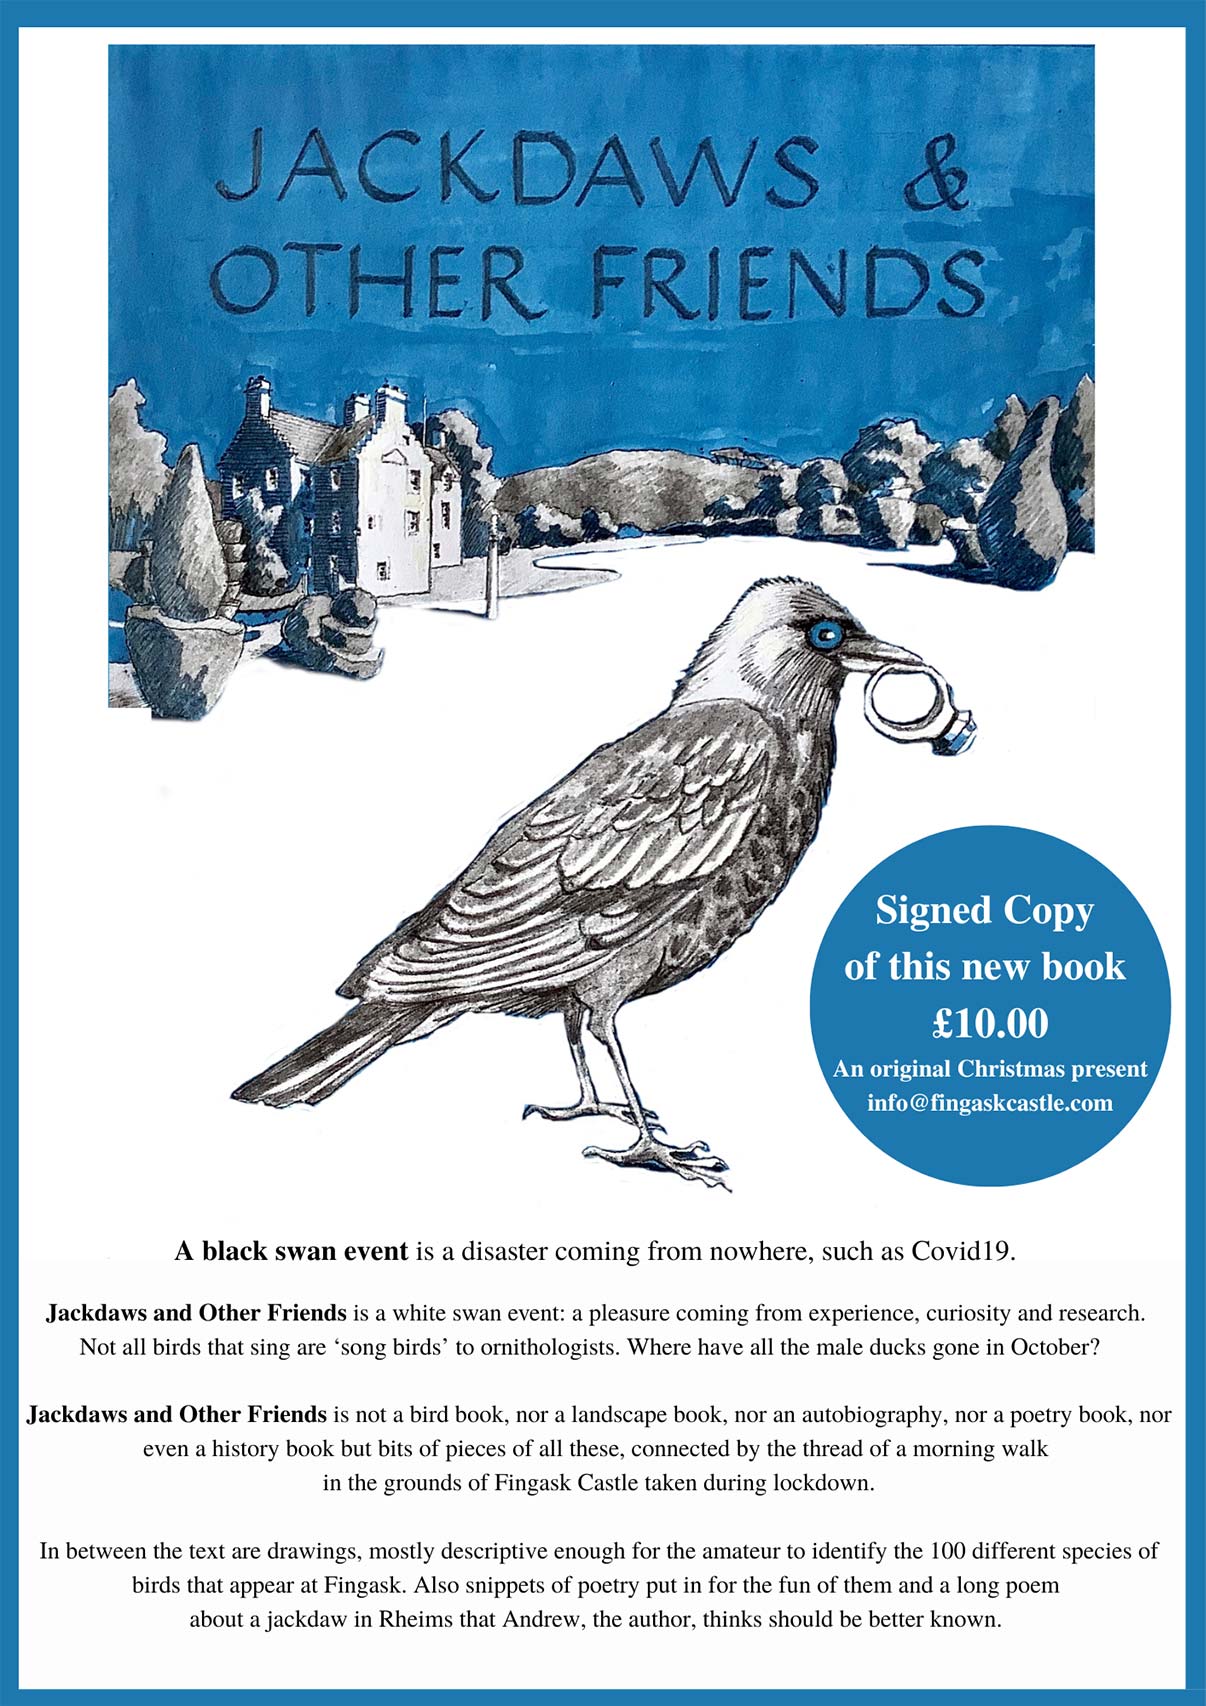 Jackdaws & other friends book signed copy